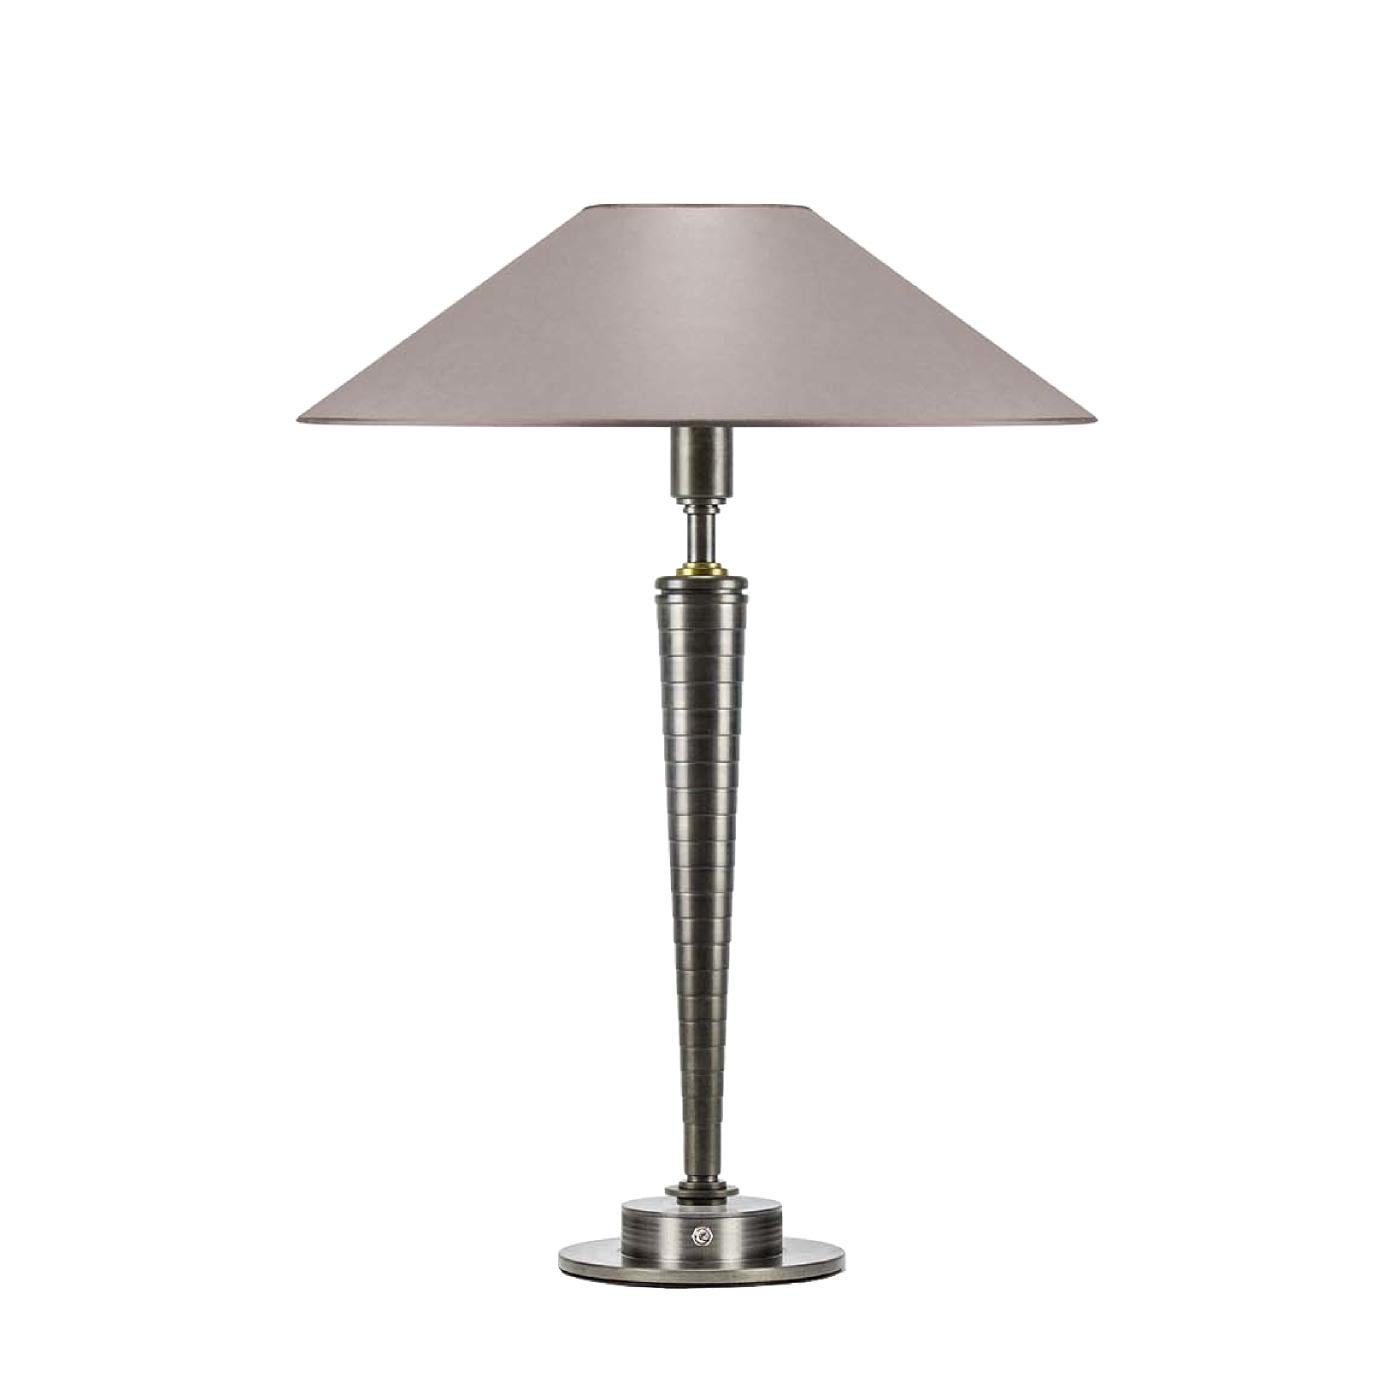 The perfect choice to add a touch of timeless elegance to any room, this table lamp will bring glow and glamour to any decor. The clean-lined silhouette is entirely handcrafted of steel with a round base and a conical stem that pairs well with the